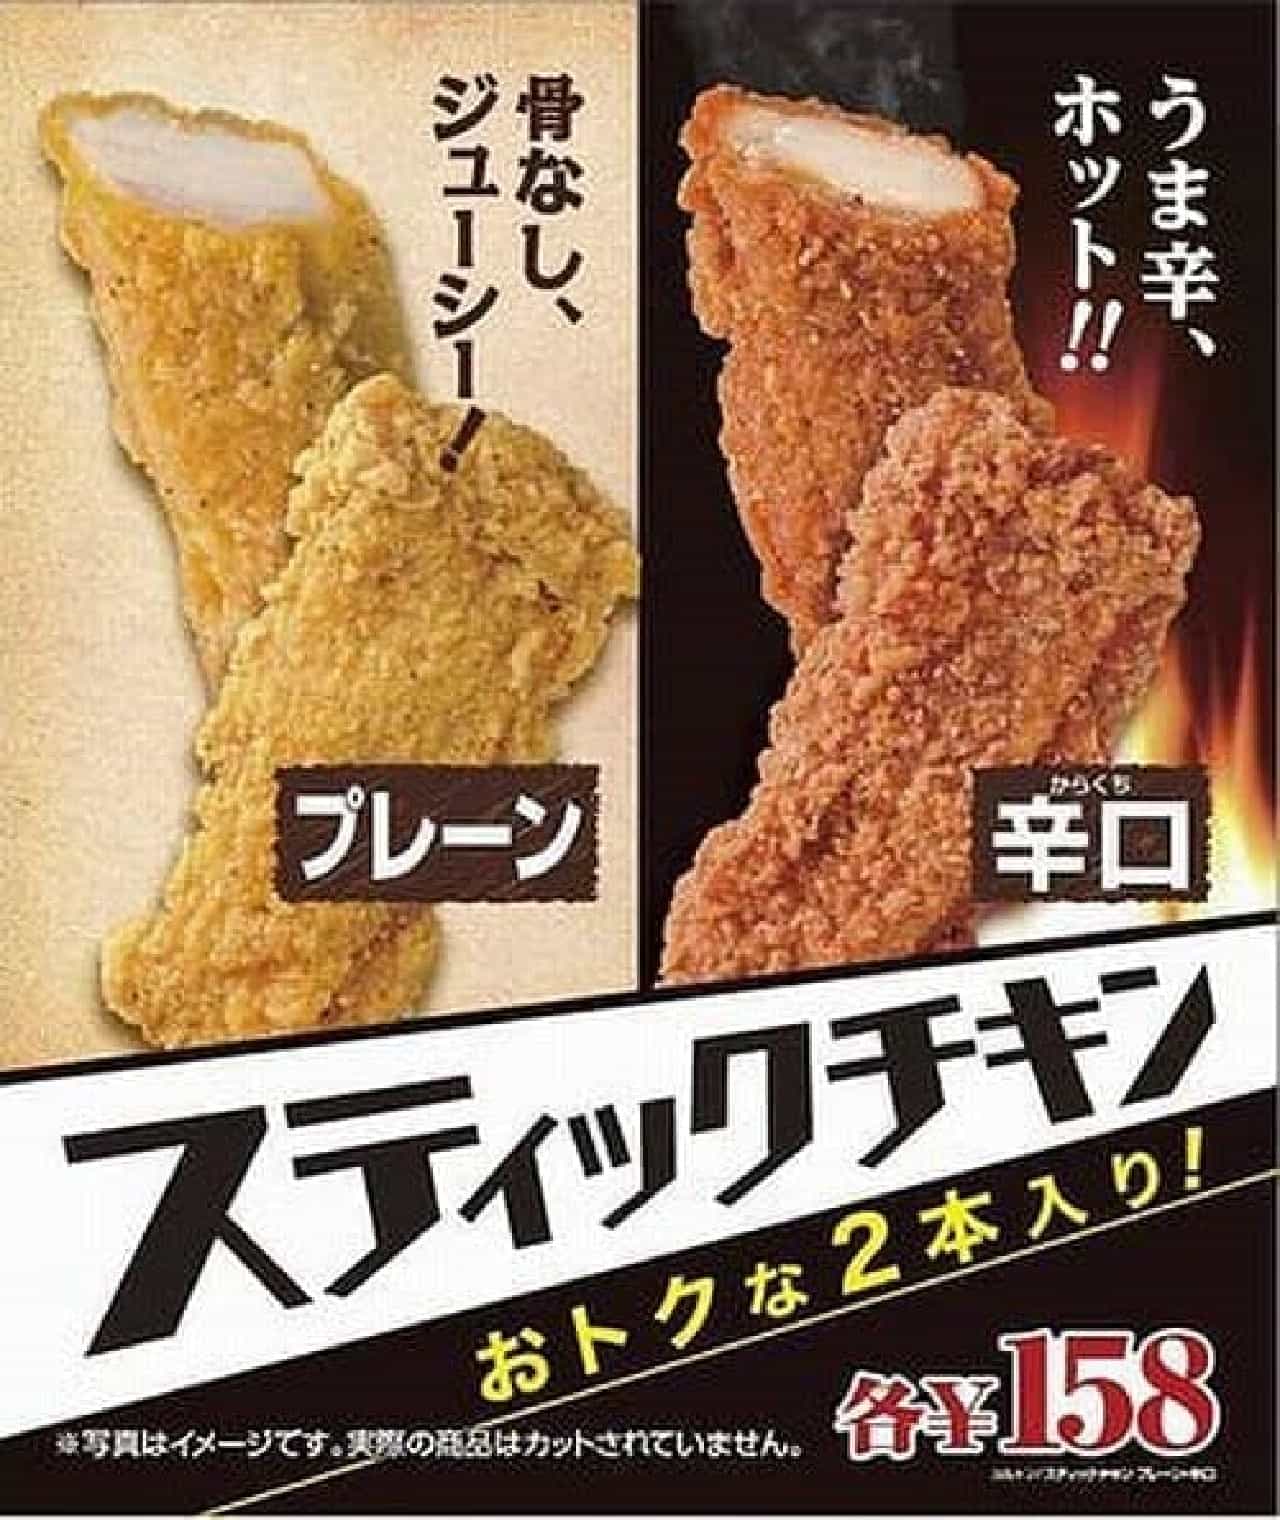 Available in two types: "stick chicken," "plain," and "dry."